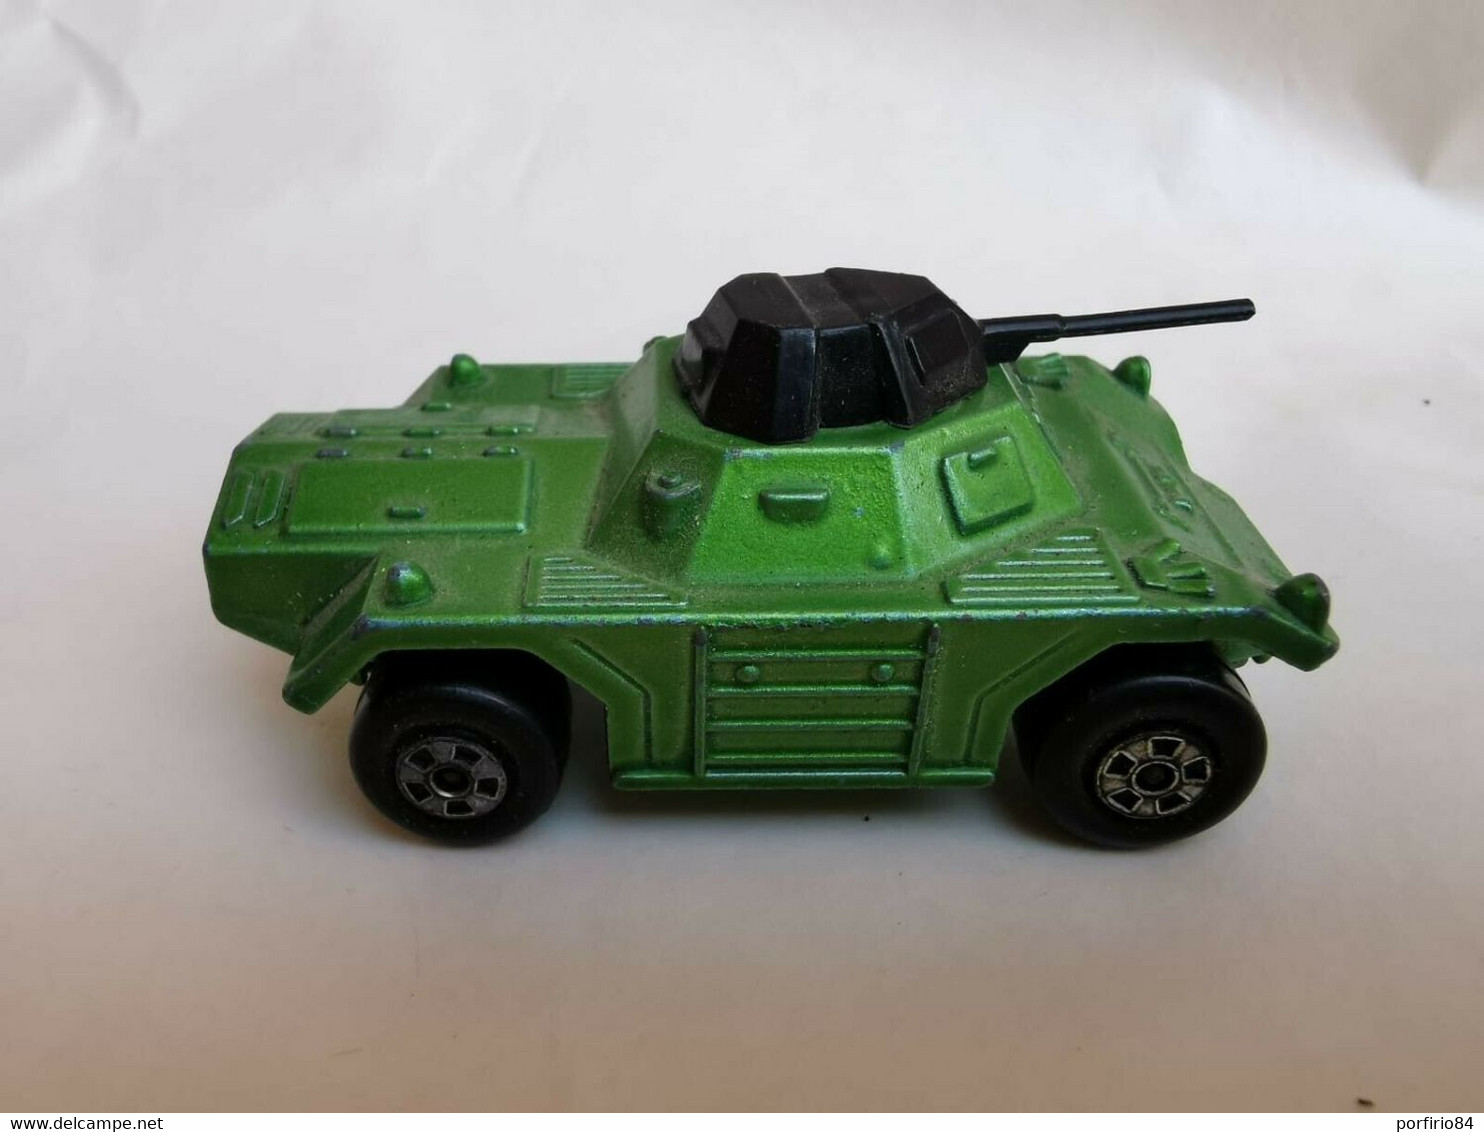 VINTAGE MODELLINO CARRO ARMATO Matchbox 1973 Rola-Matics N.73 WEASEL ARMORED TRUCK   Made In England - Panzer